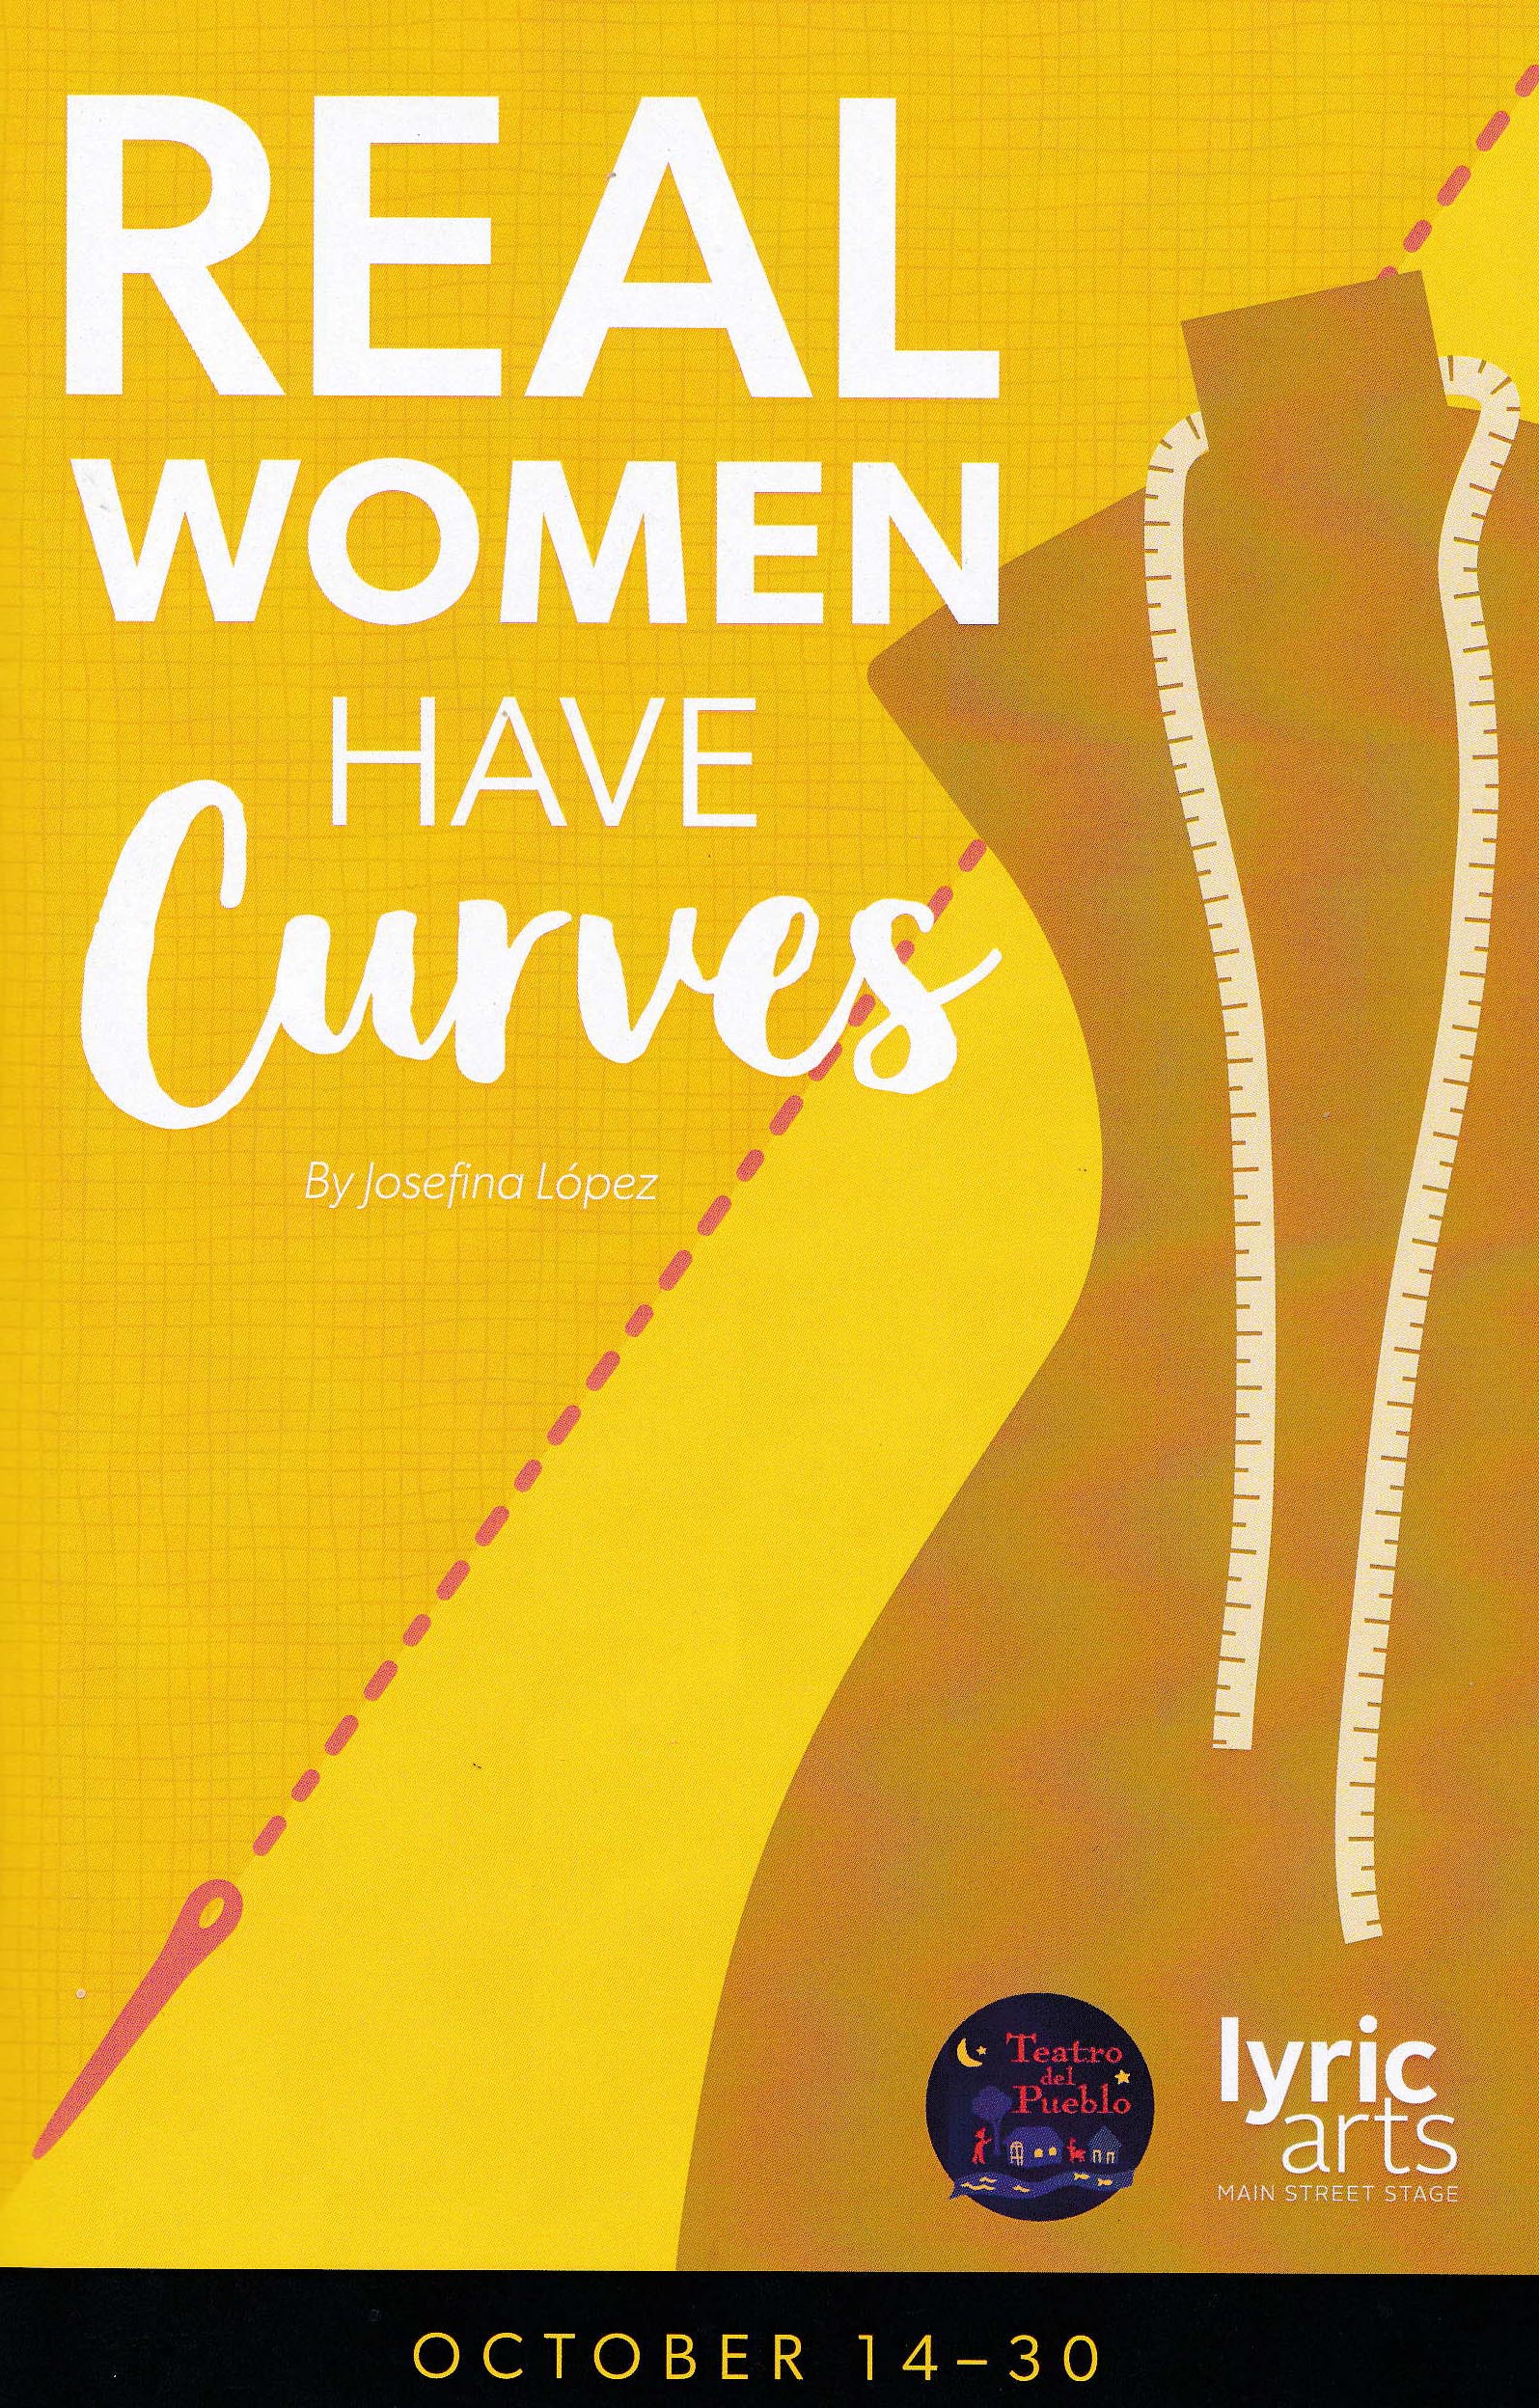 Cherry and Spoon: Real Women Have Curves at Lyric Arts, a co-production  with Teatro del Pueblo